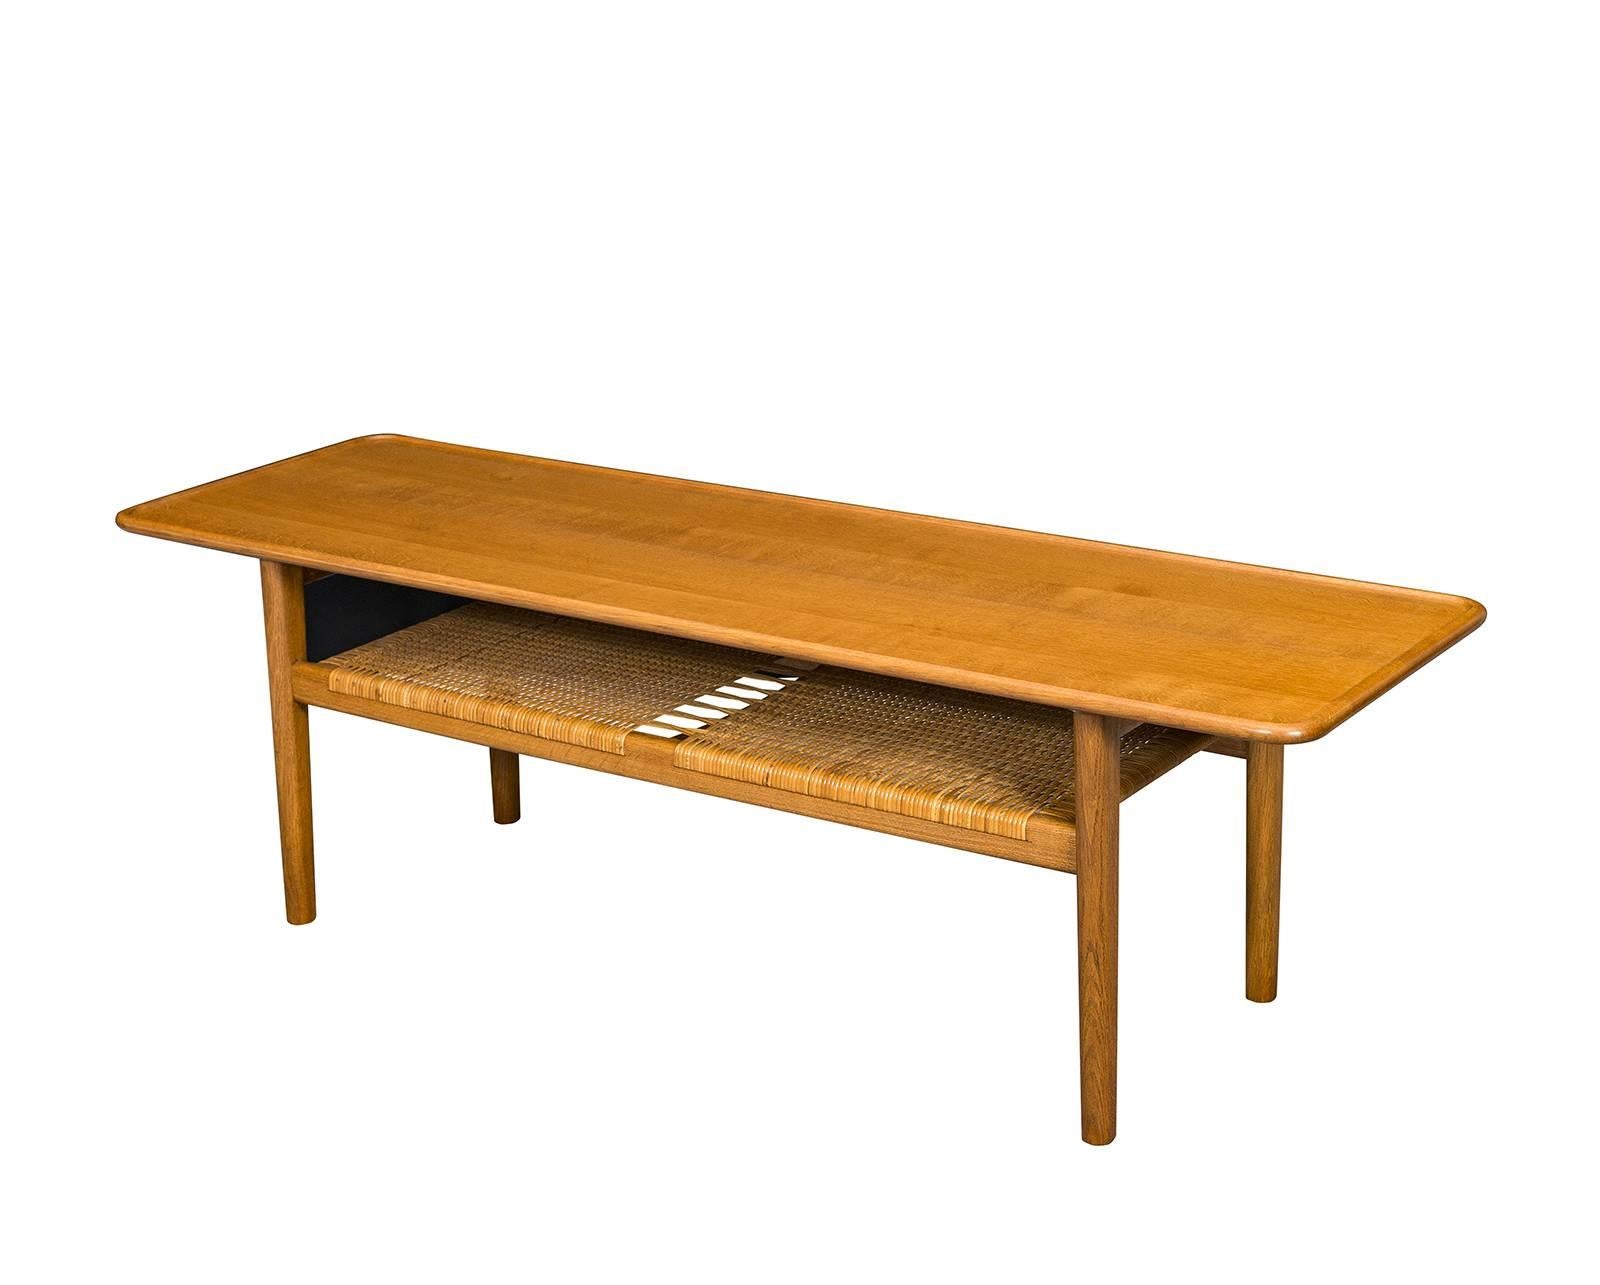 Hans Wegner AT-10 coffee table designed in 1955 and produced by Andreas Tuck.    Store formerly known as ARTFUL DODGER INC 